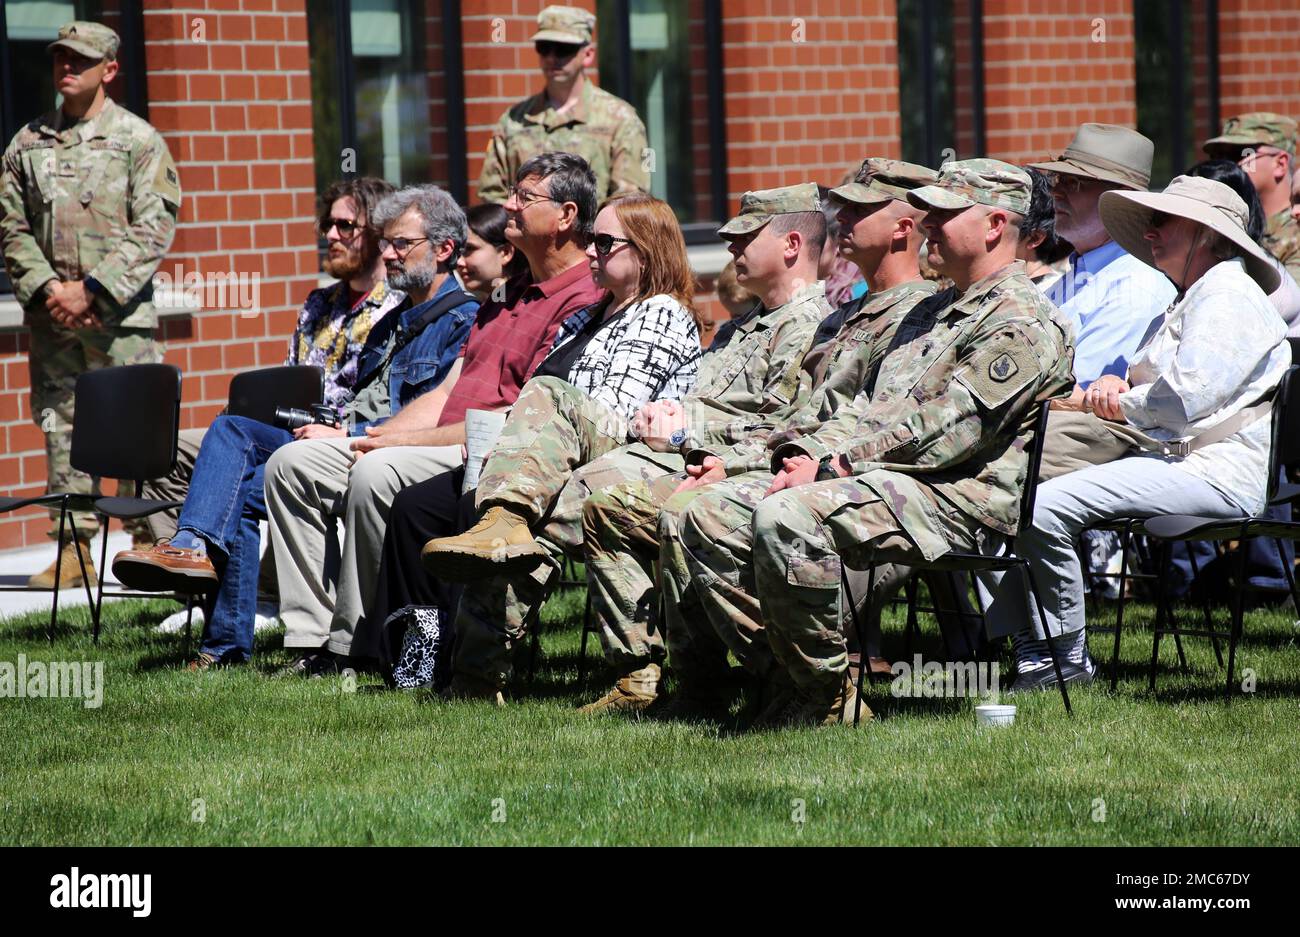 Col. Jim Perrin, Commander of the 81st Stryker Brigade Combat Team, Command Sgt. Maj. Kelly Wickel, Senior Enlisted Leader of the 81st Stryker Brigade Combat Team and Lt. Col. Matt Braddock, former commander of the 2nd Battalion, 146th Field Artillery Regiment observe the ribbon cutting ceremony for the Thurston County Readiness Center in Tumwater, Wash. on June 25, 2022. The new readiness center will be the home of 2nd Battalion, 146th Field Artillery Regiment and serve as the hub for the Washington National Guard’s operations in Southwest Washington. Stock Photo